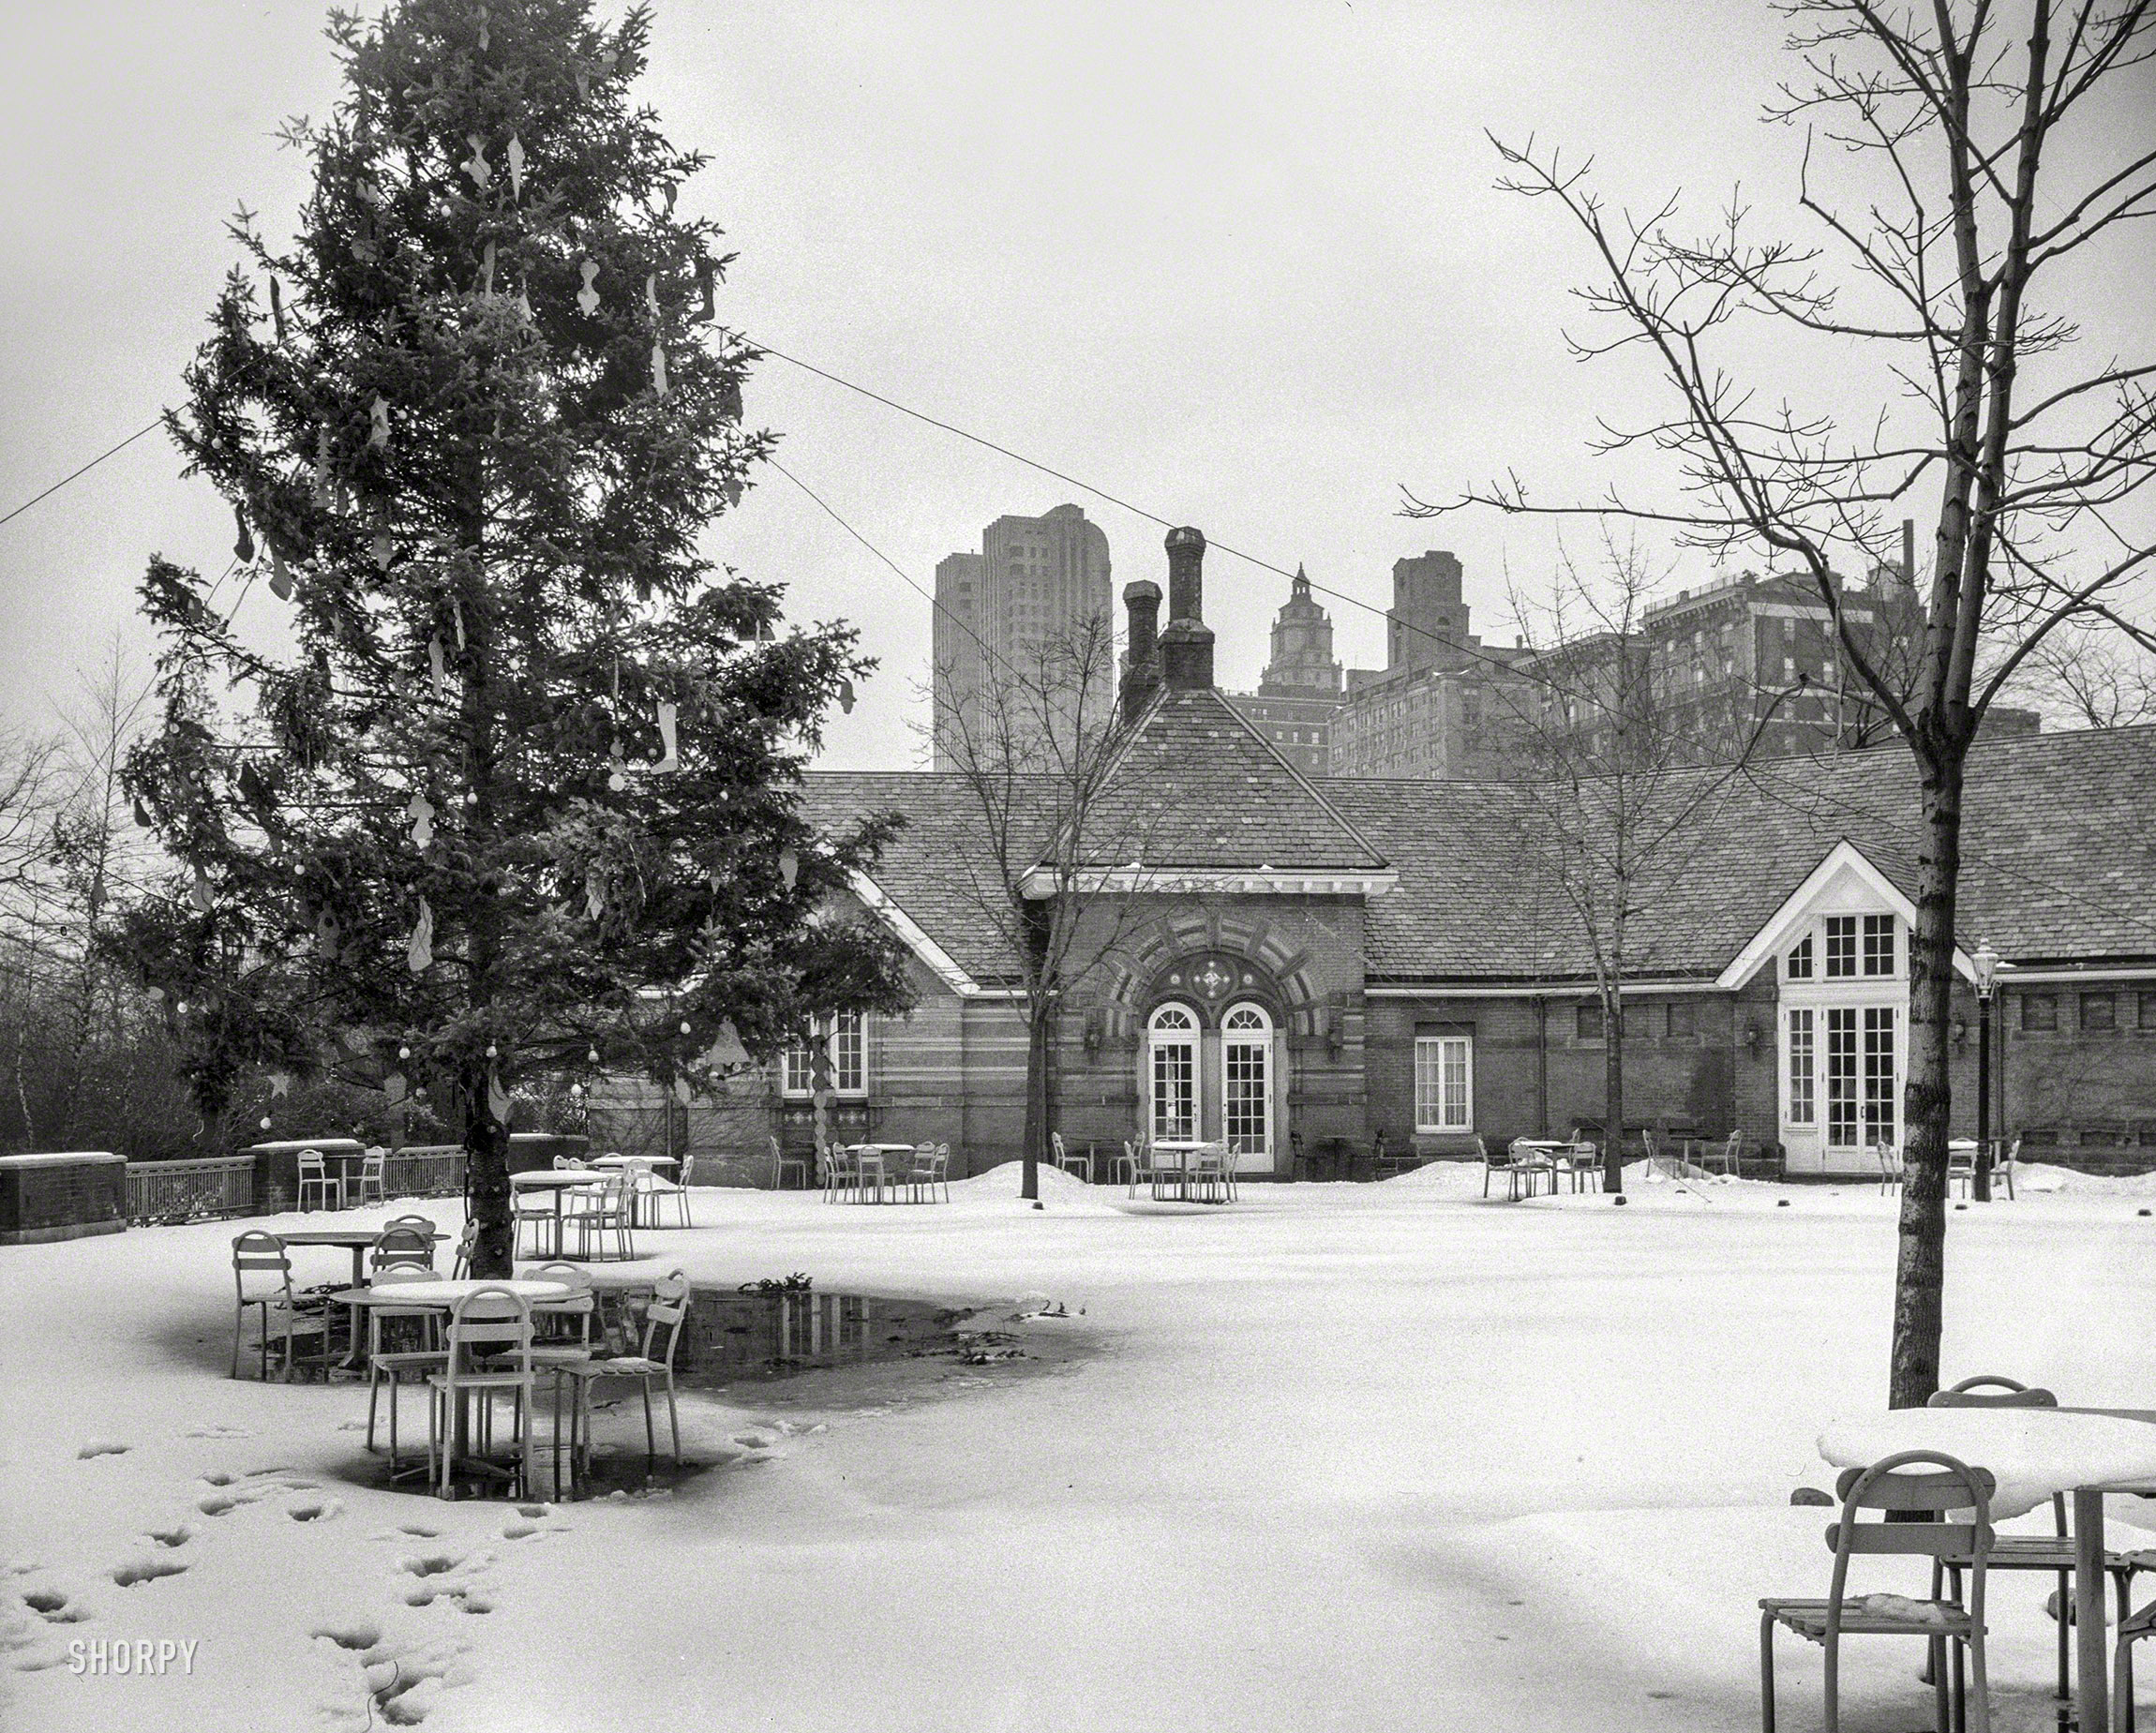 January 5, 1944. "Tavern on the Green, Central Park, New York City. Christmas exterior. Arthur Schleifer, client." The former sheepfold, recently (April 2014) reopened under new management. Gottscho-Schleisner photo. View full size.